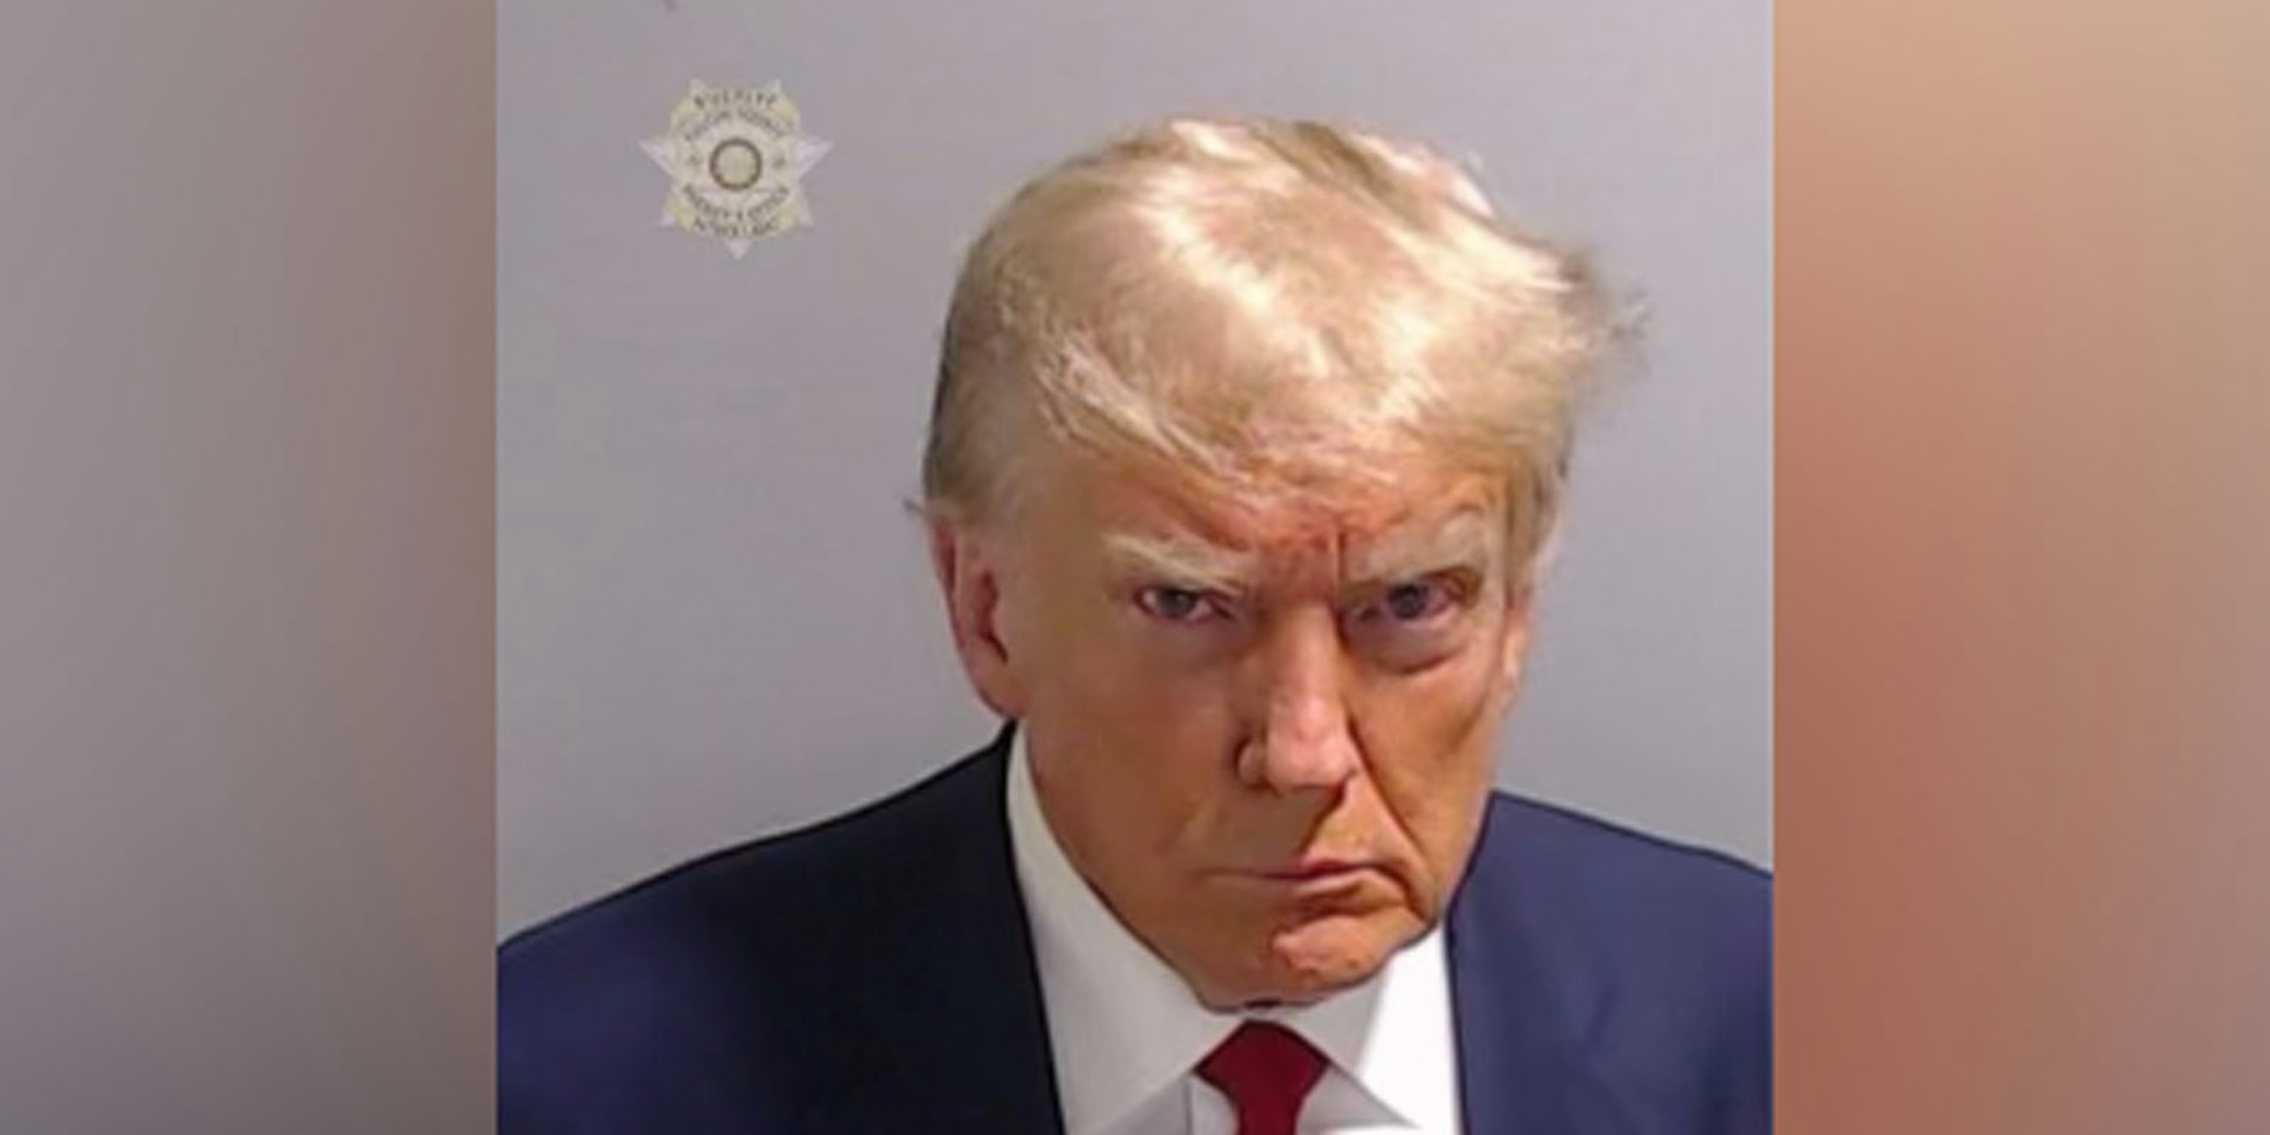 trump staring steely eyed as he's photographed and booked